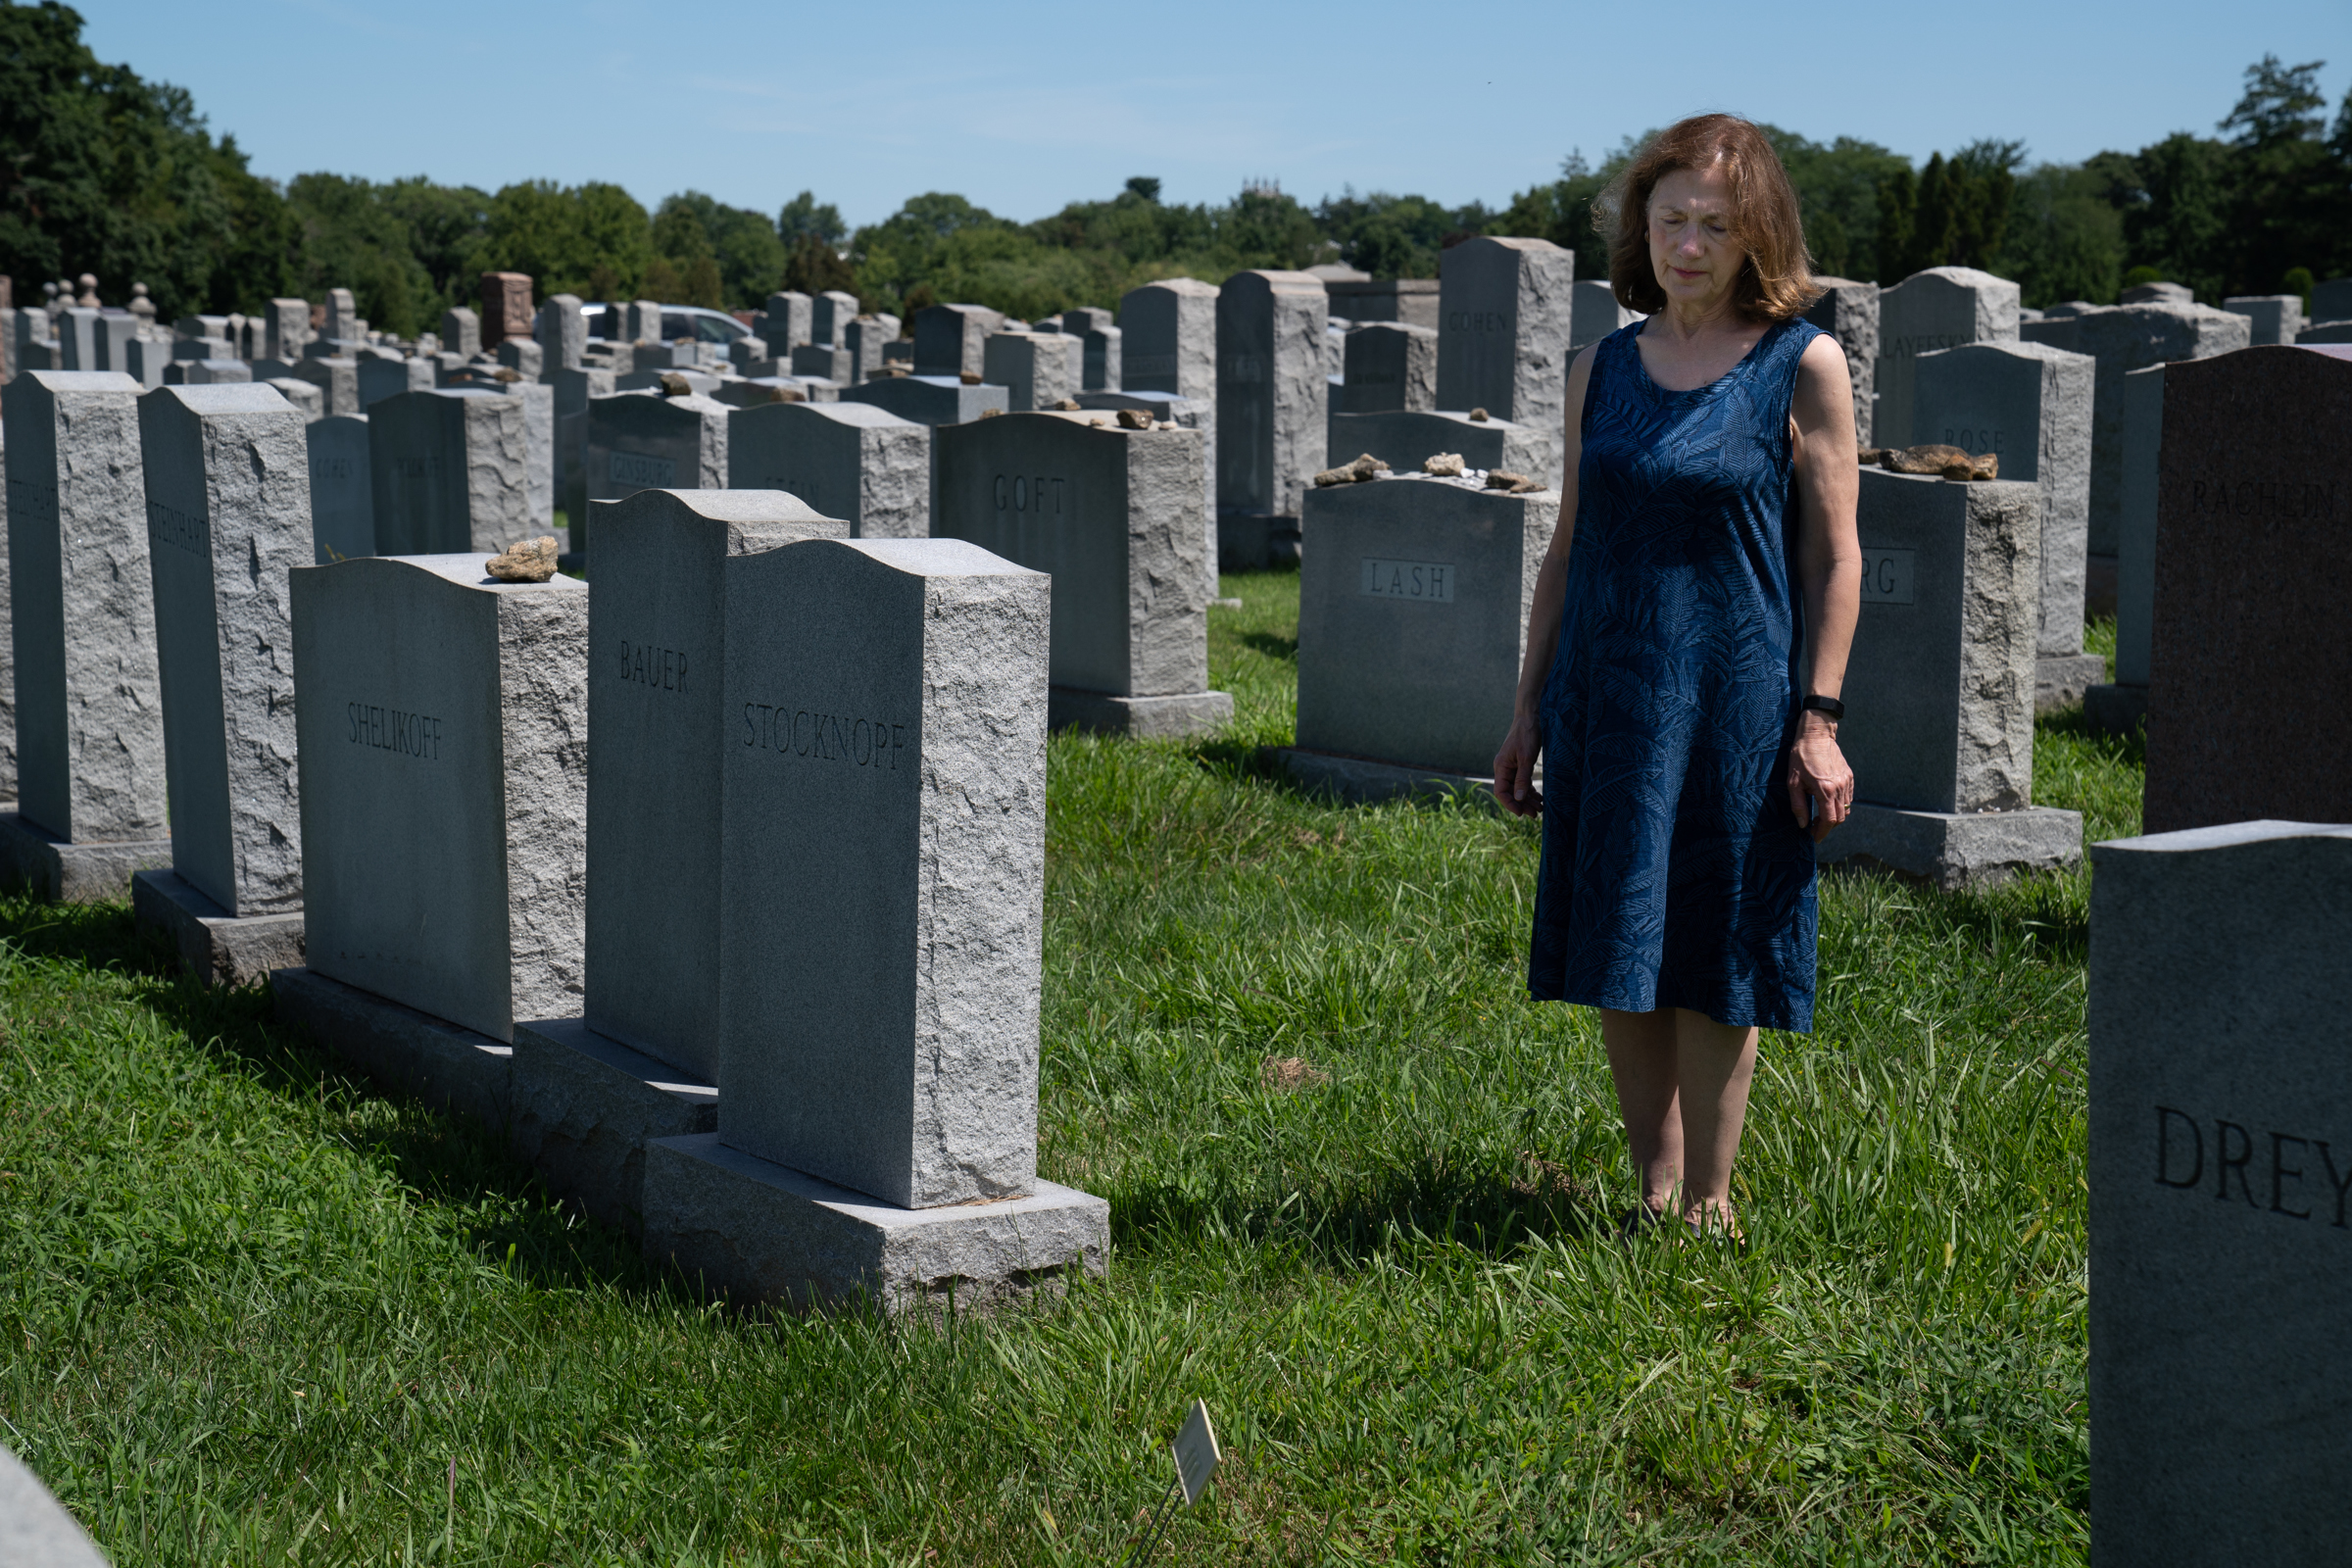 Cemeteries, headstones, and old family photos